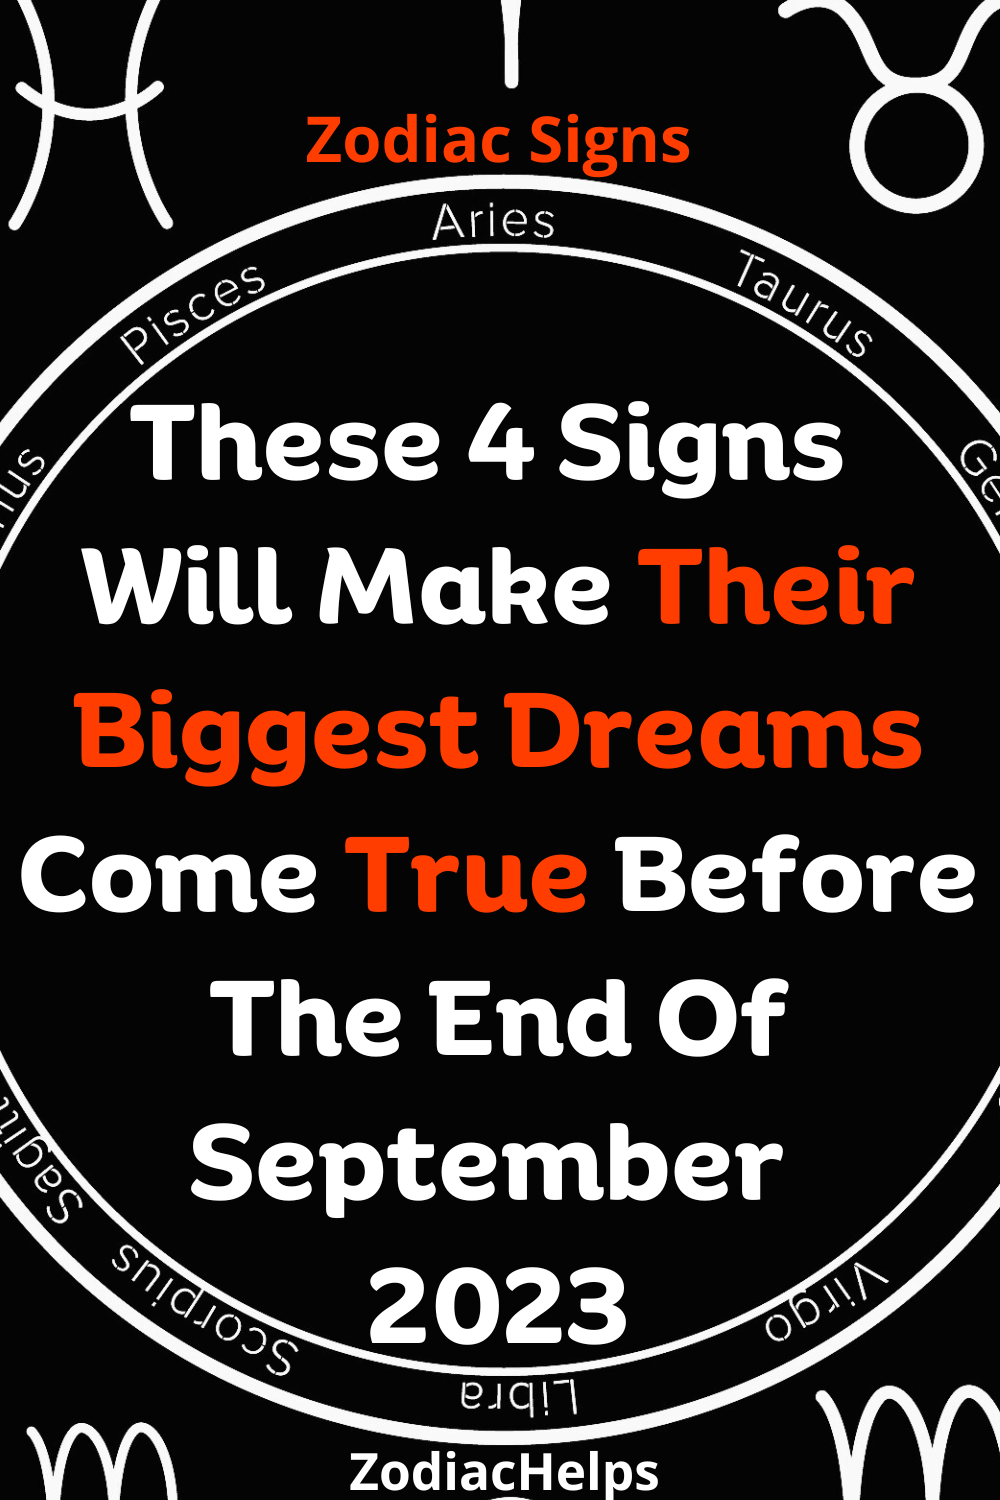 These 4 Signs Will Make Their Biggest Dreams Come True Before The End Of September 2023